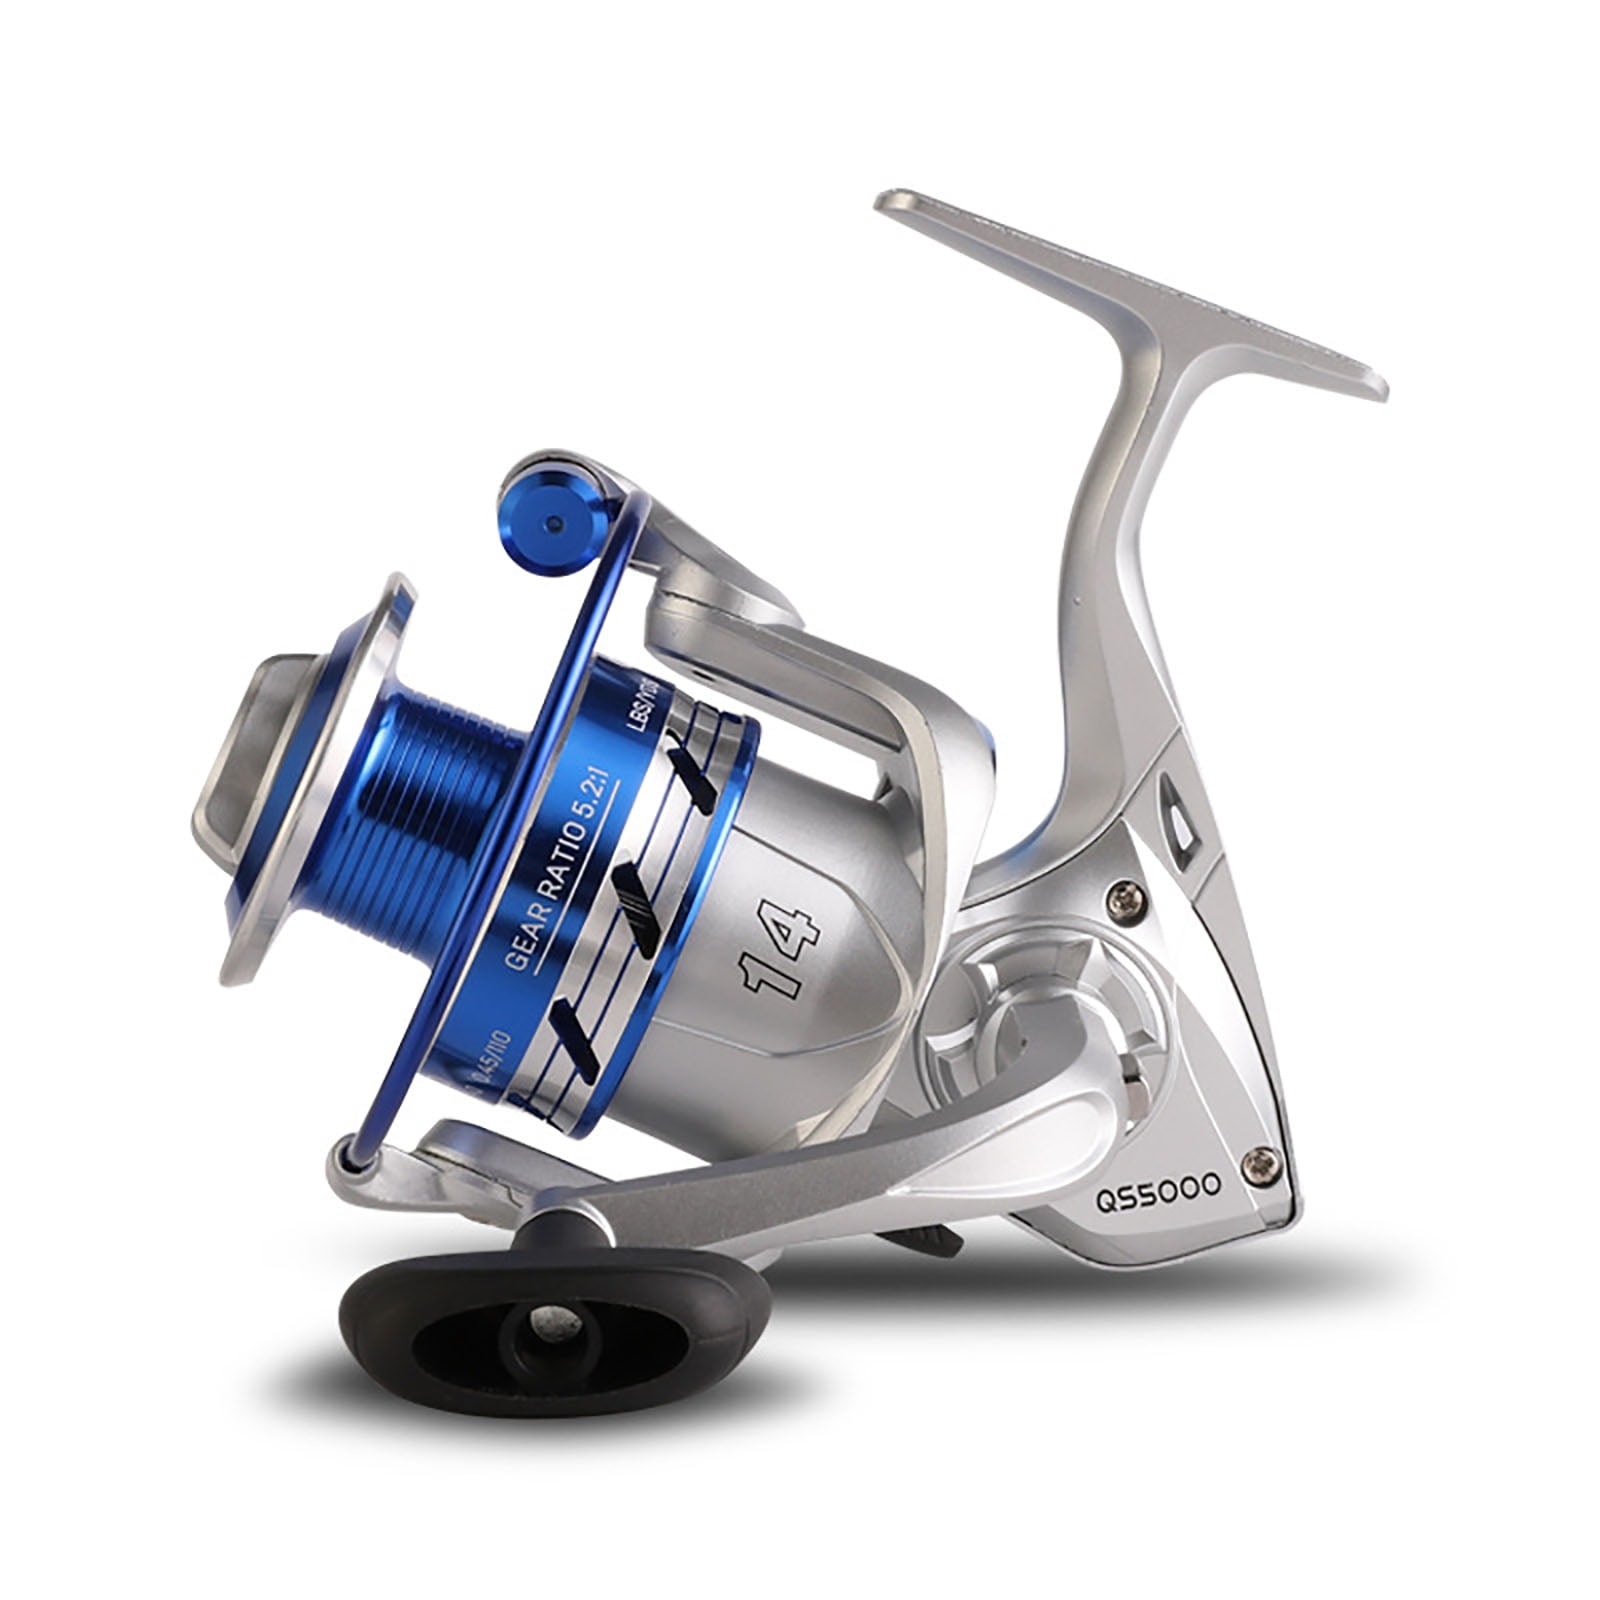 Lure Spinning Fishing Reel Max Drag 5kg Gear Ratio 5.2:1 1000-7000